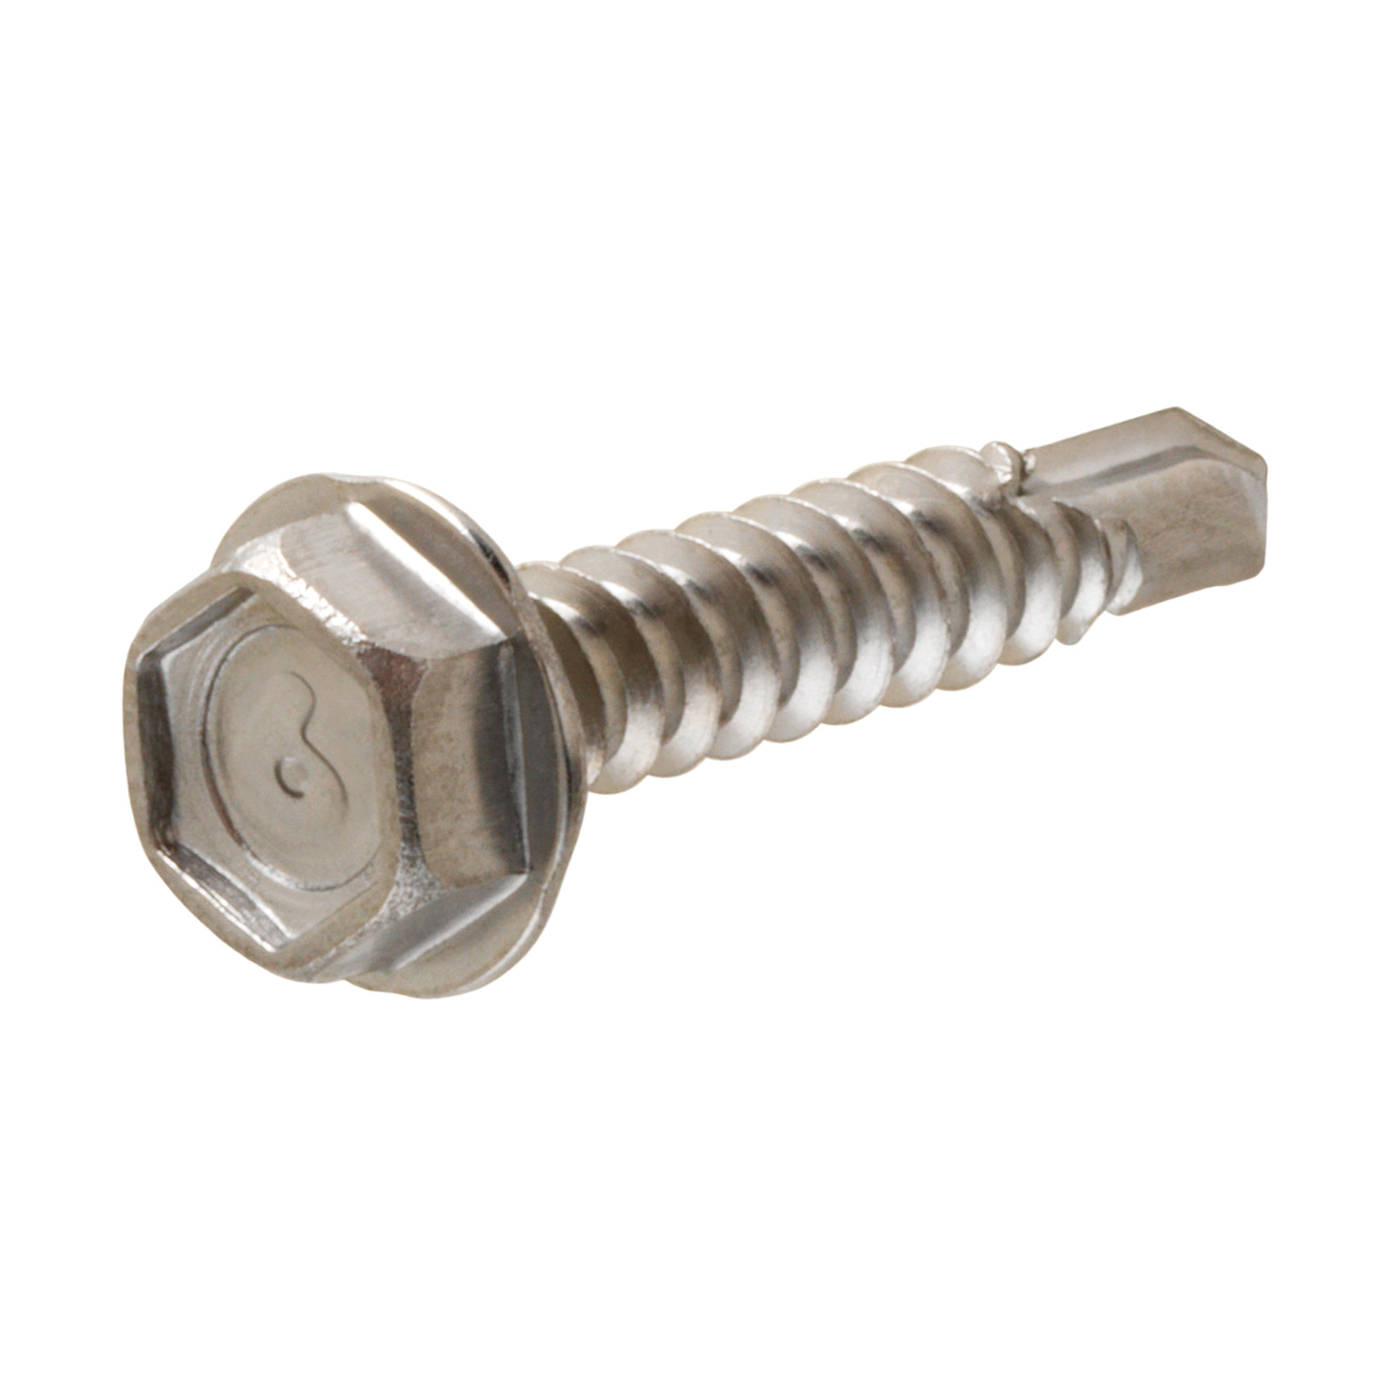 881841 Screw, #12 Thread, 3/4 in L, Coarse Thread, Washer Head, Hex Drive, Self-Drilling Point, Stainless Steel